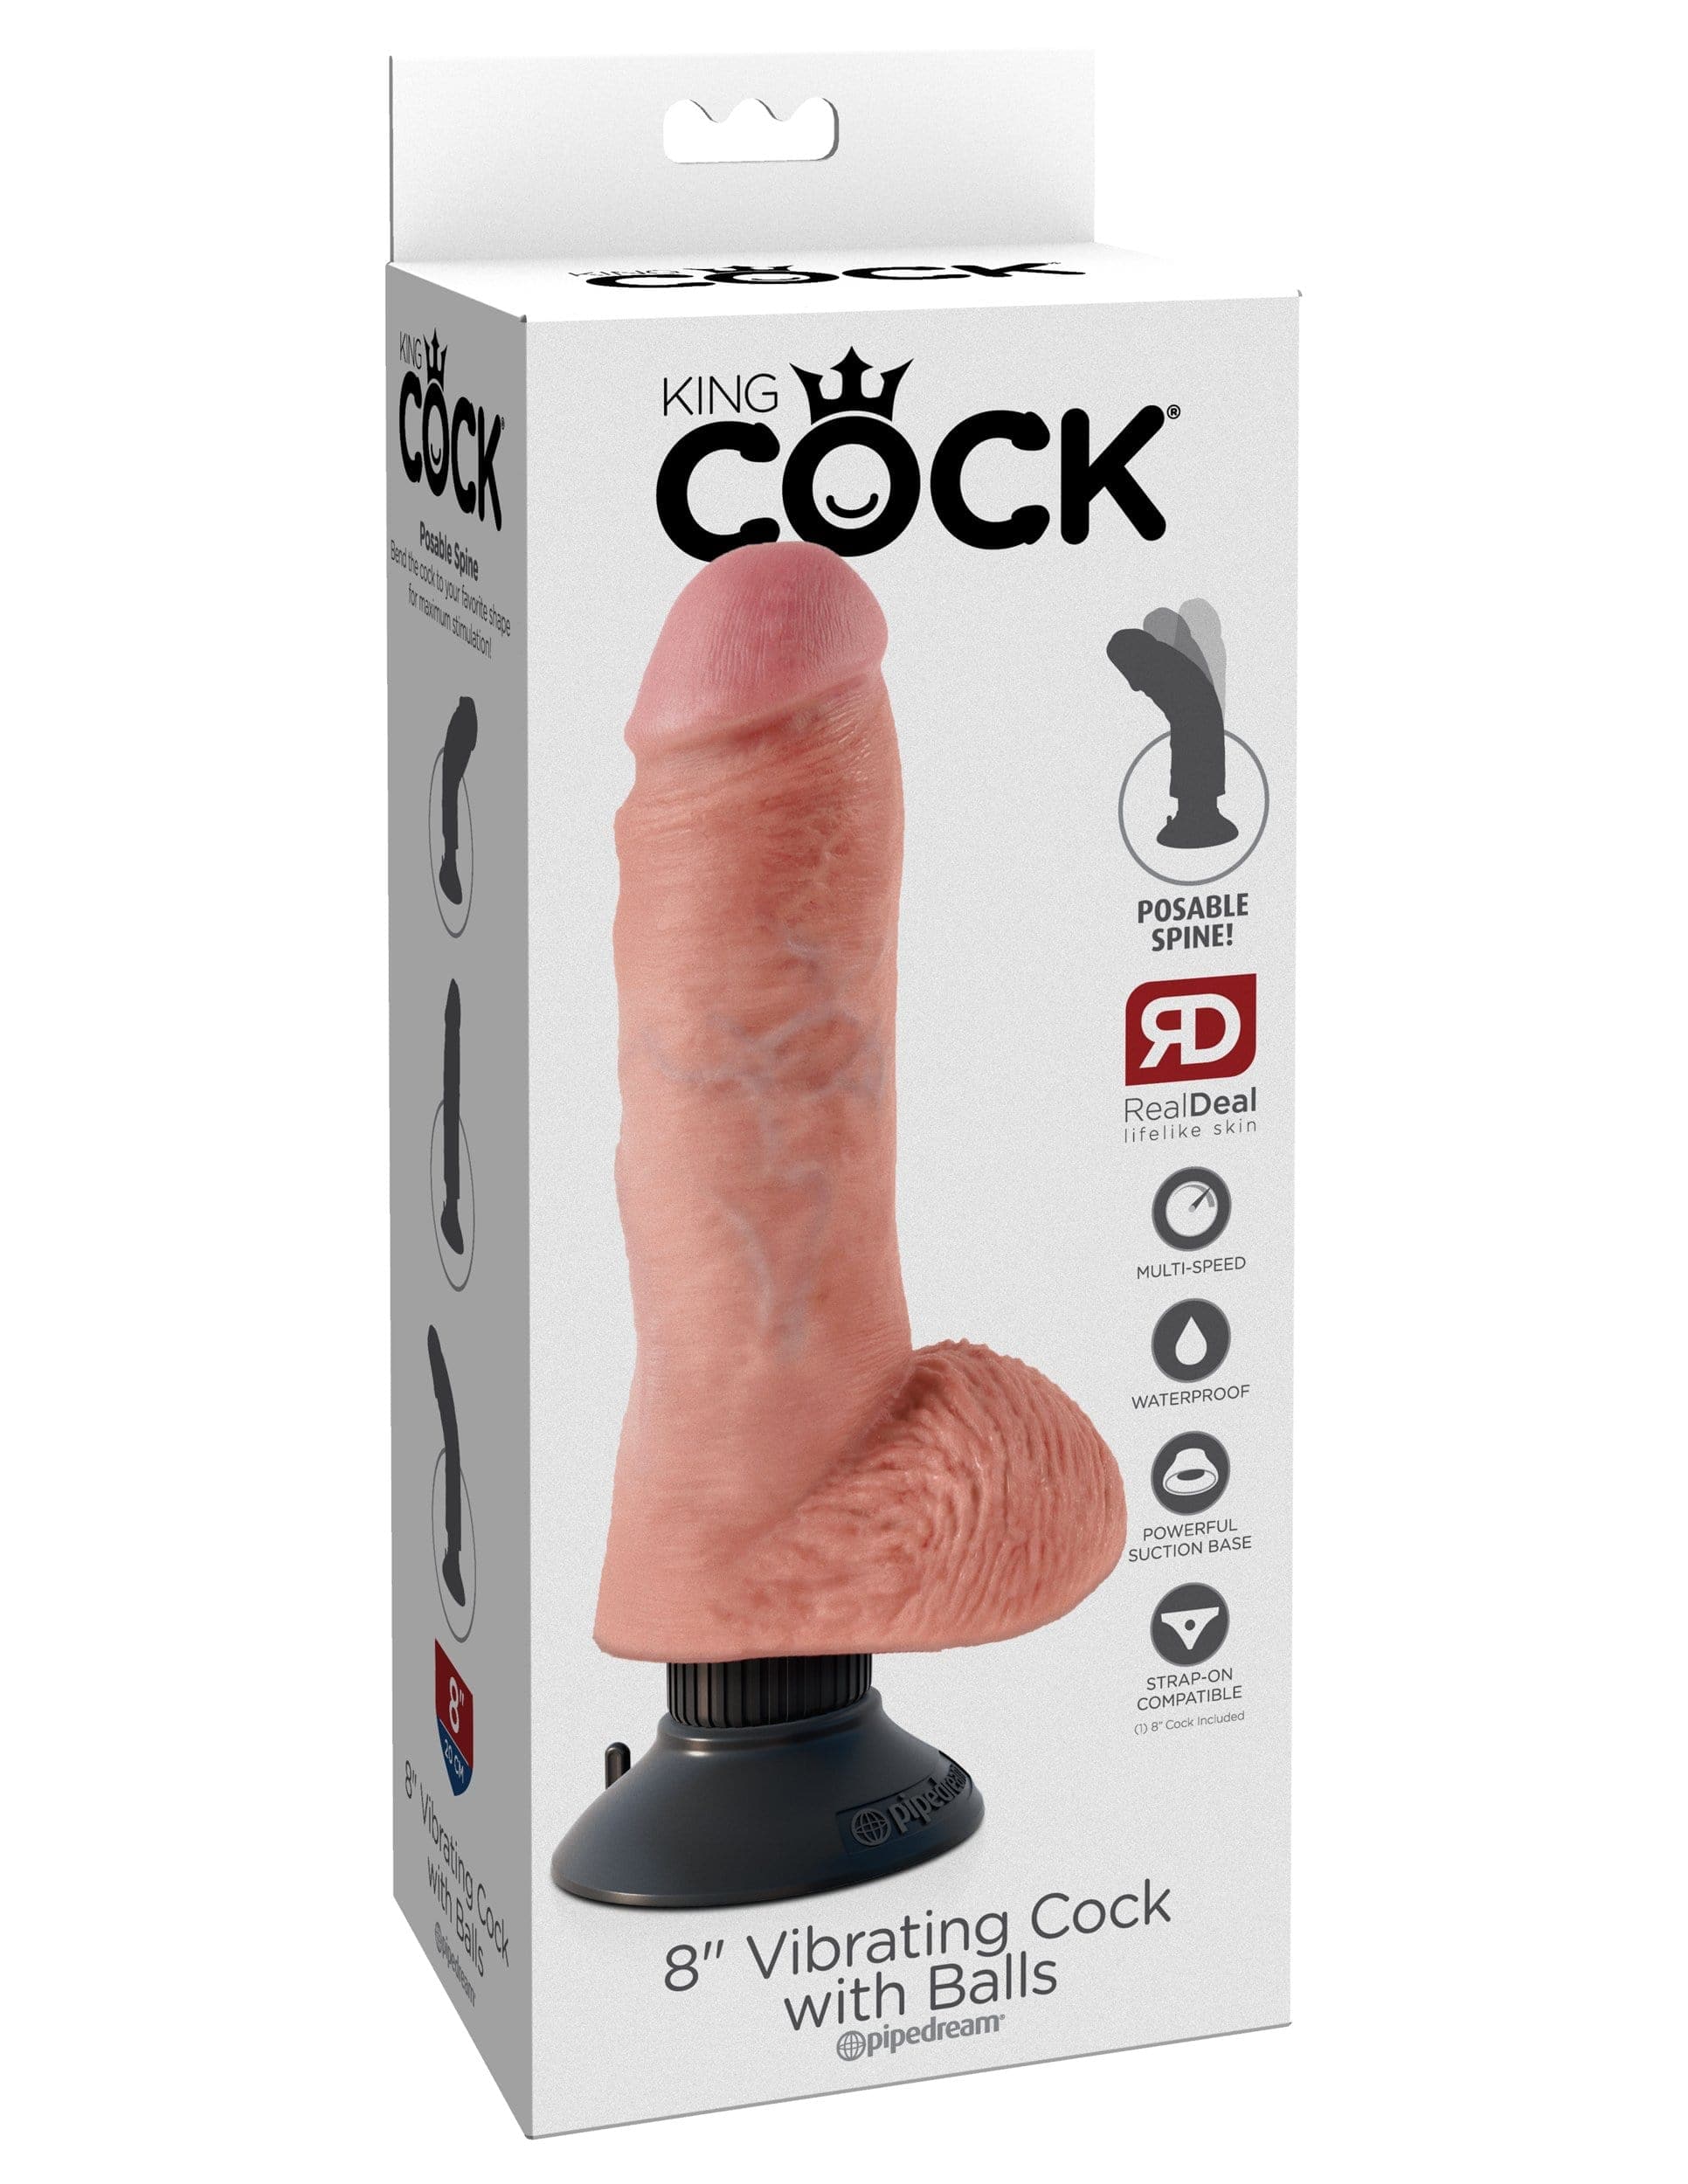 king cock 8 inch vibrating cock with balls flesh